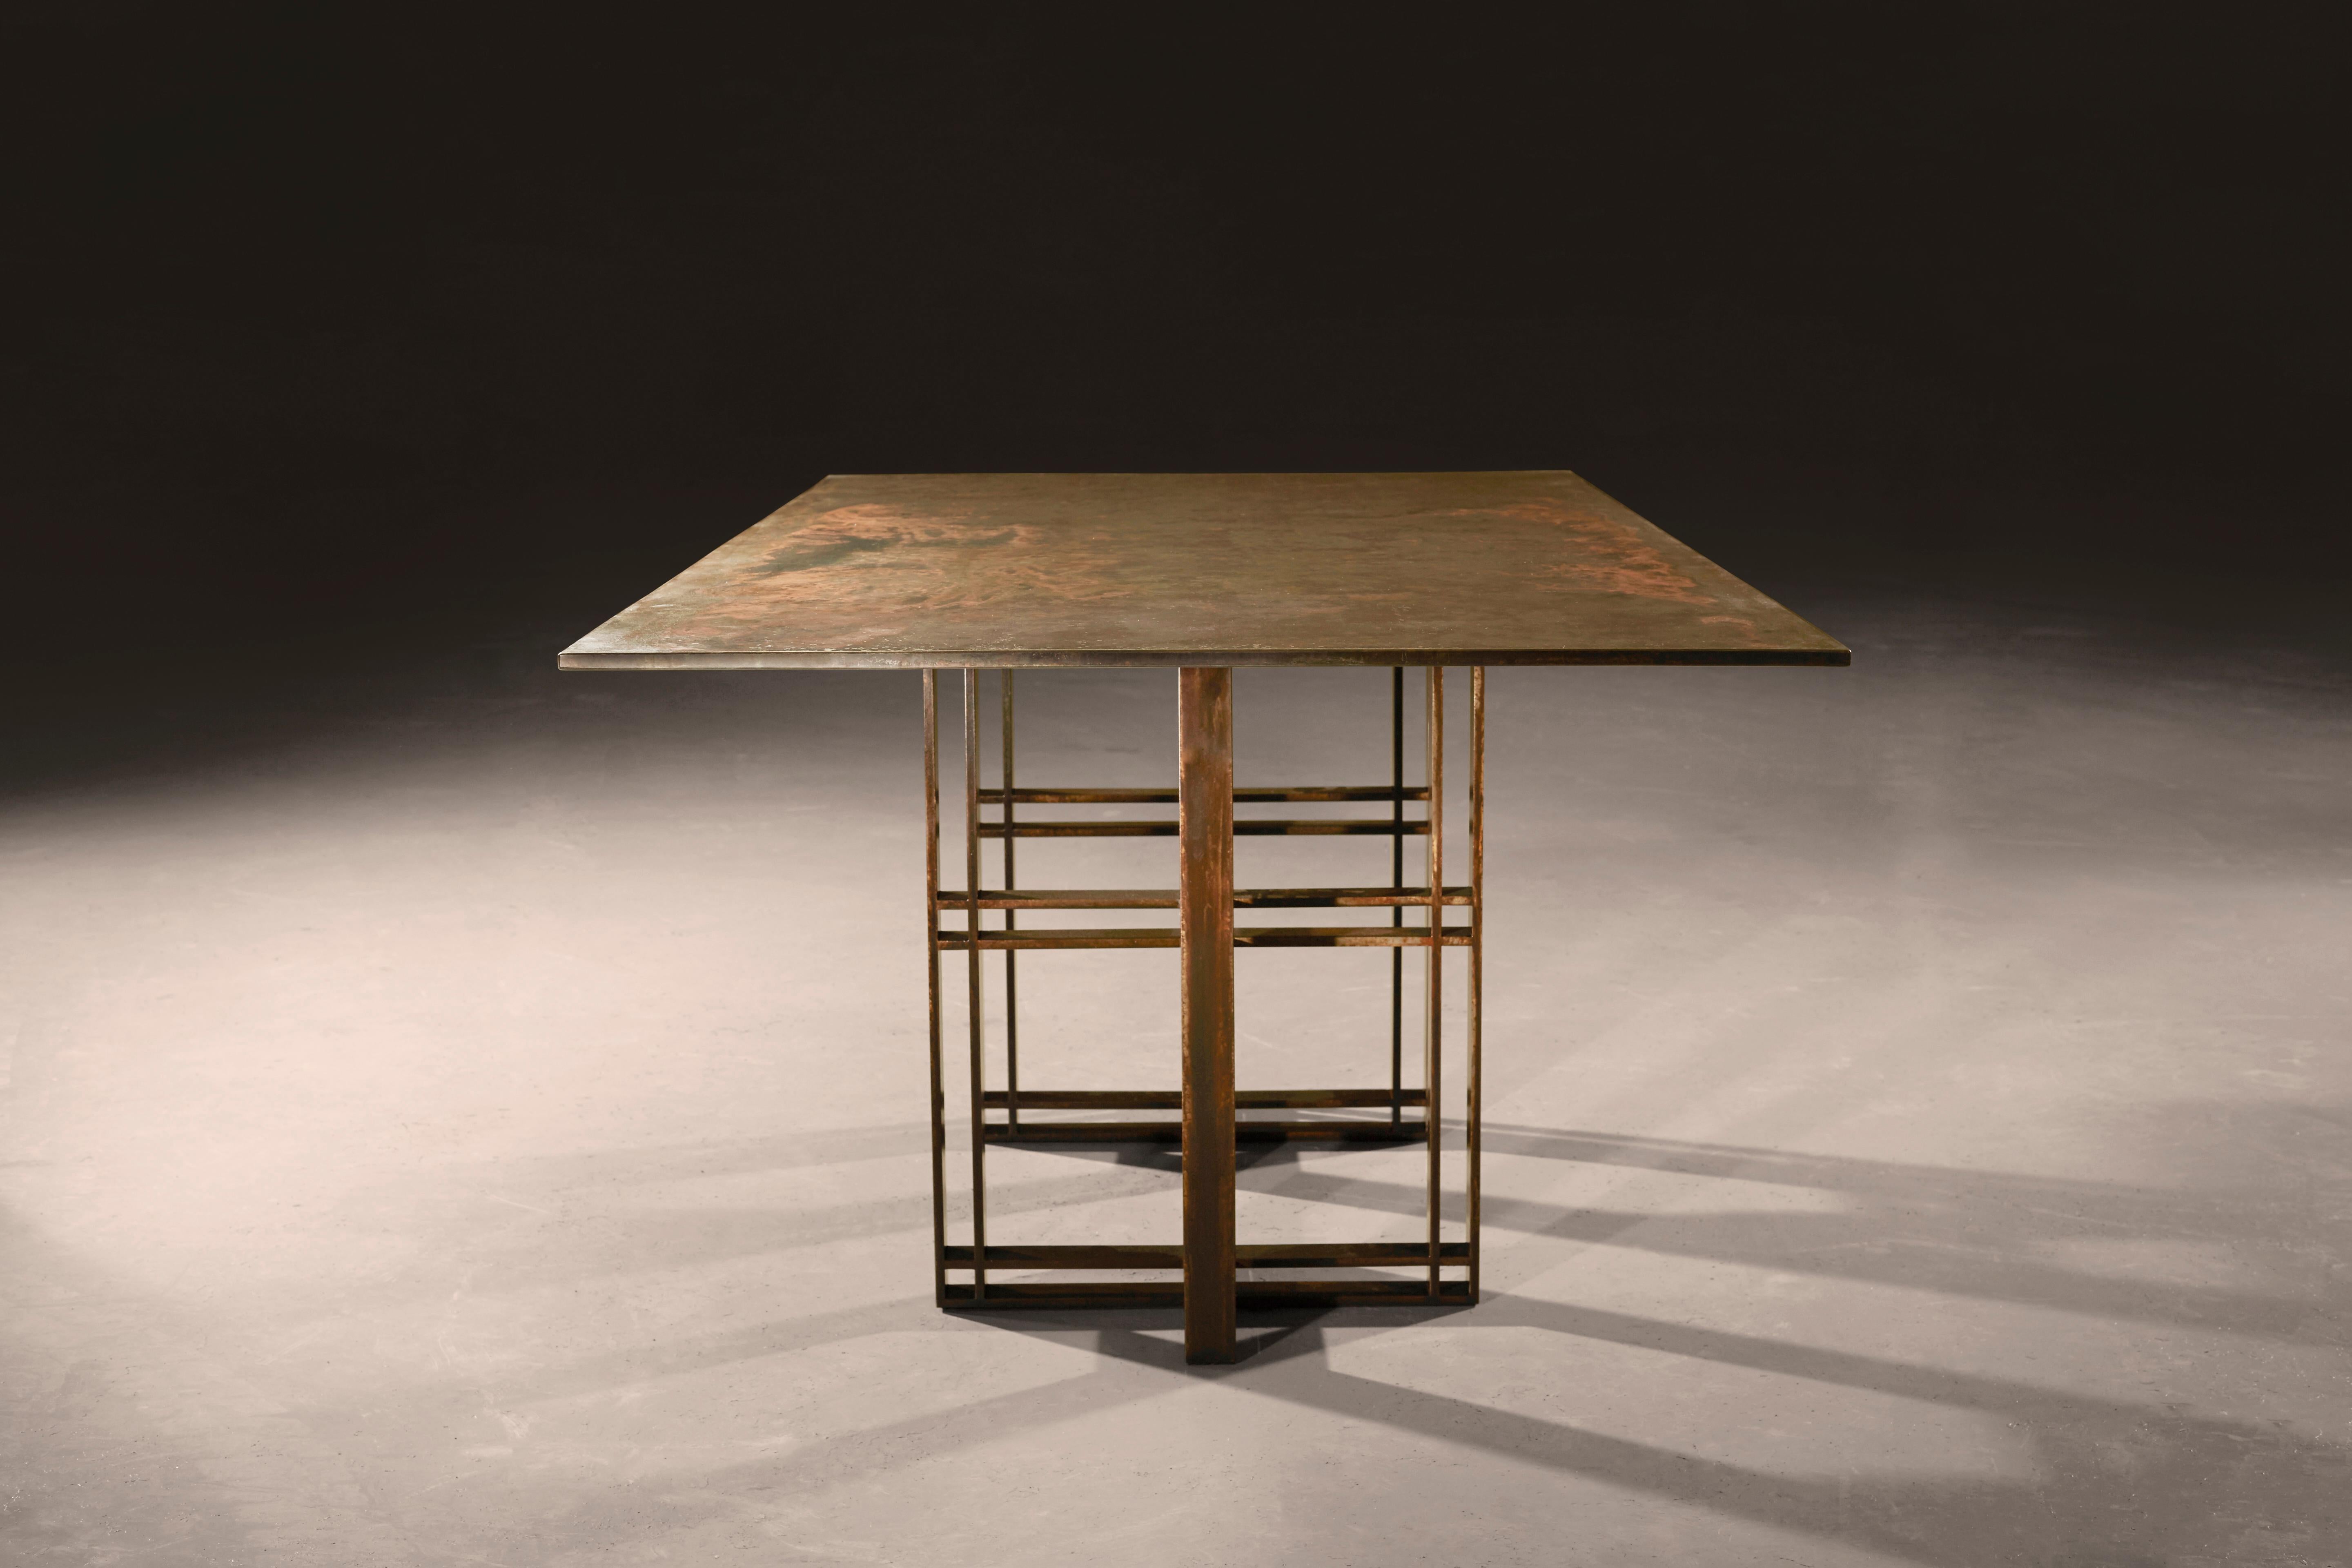 English Athwart Bronze and steel dining table handcrafted and signed by Novocastrian